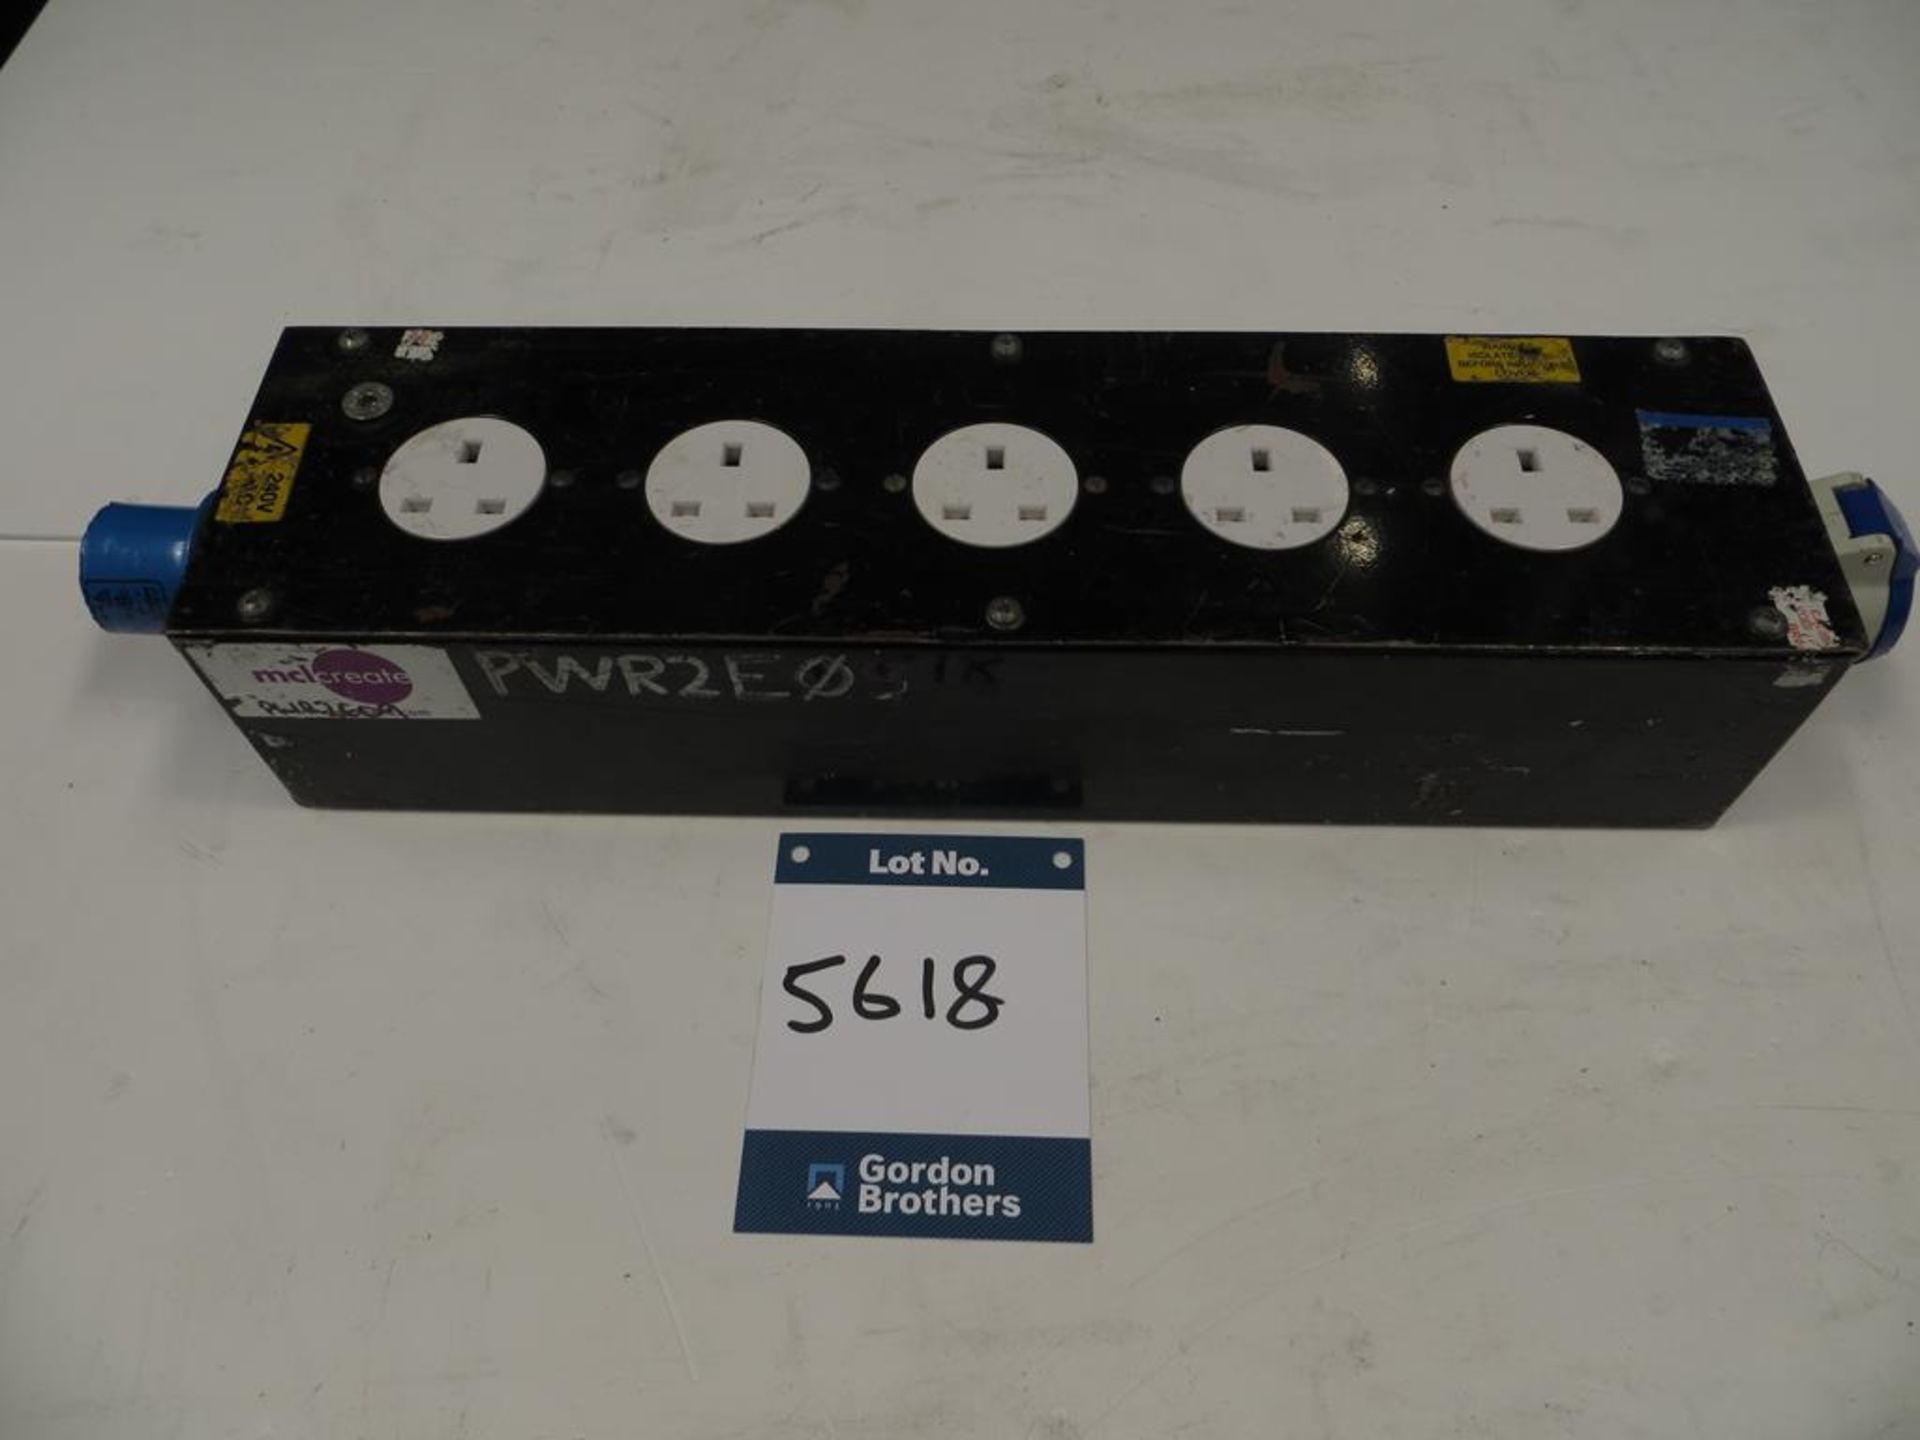 Five way, 13 amp mains distribution unit with 16 a